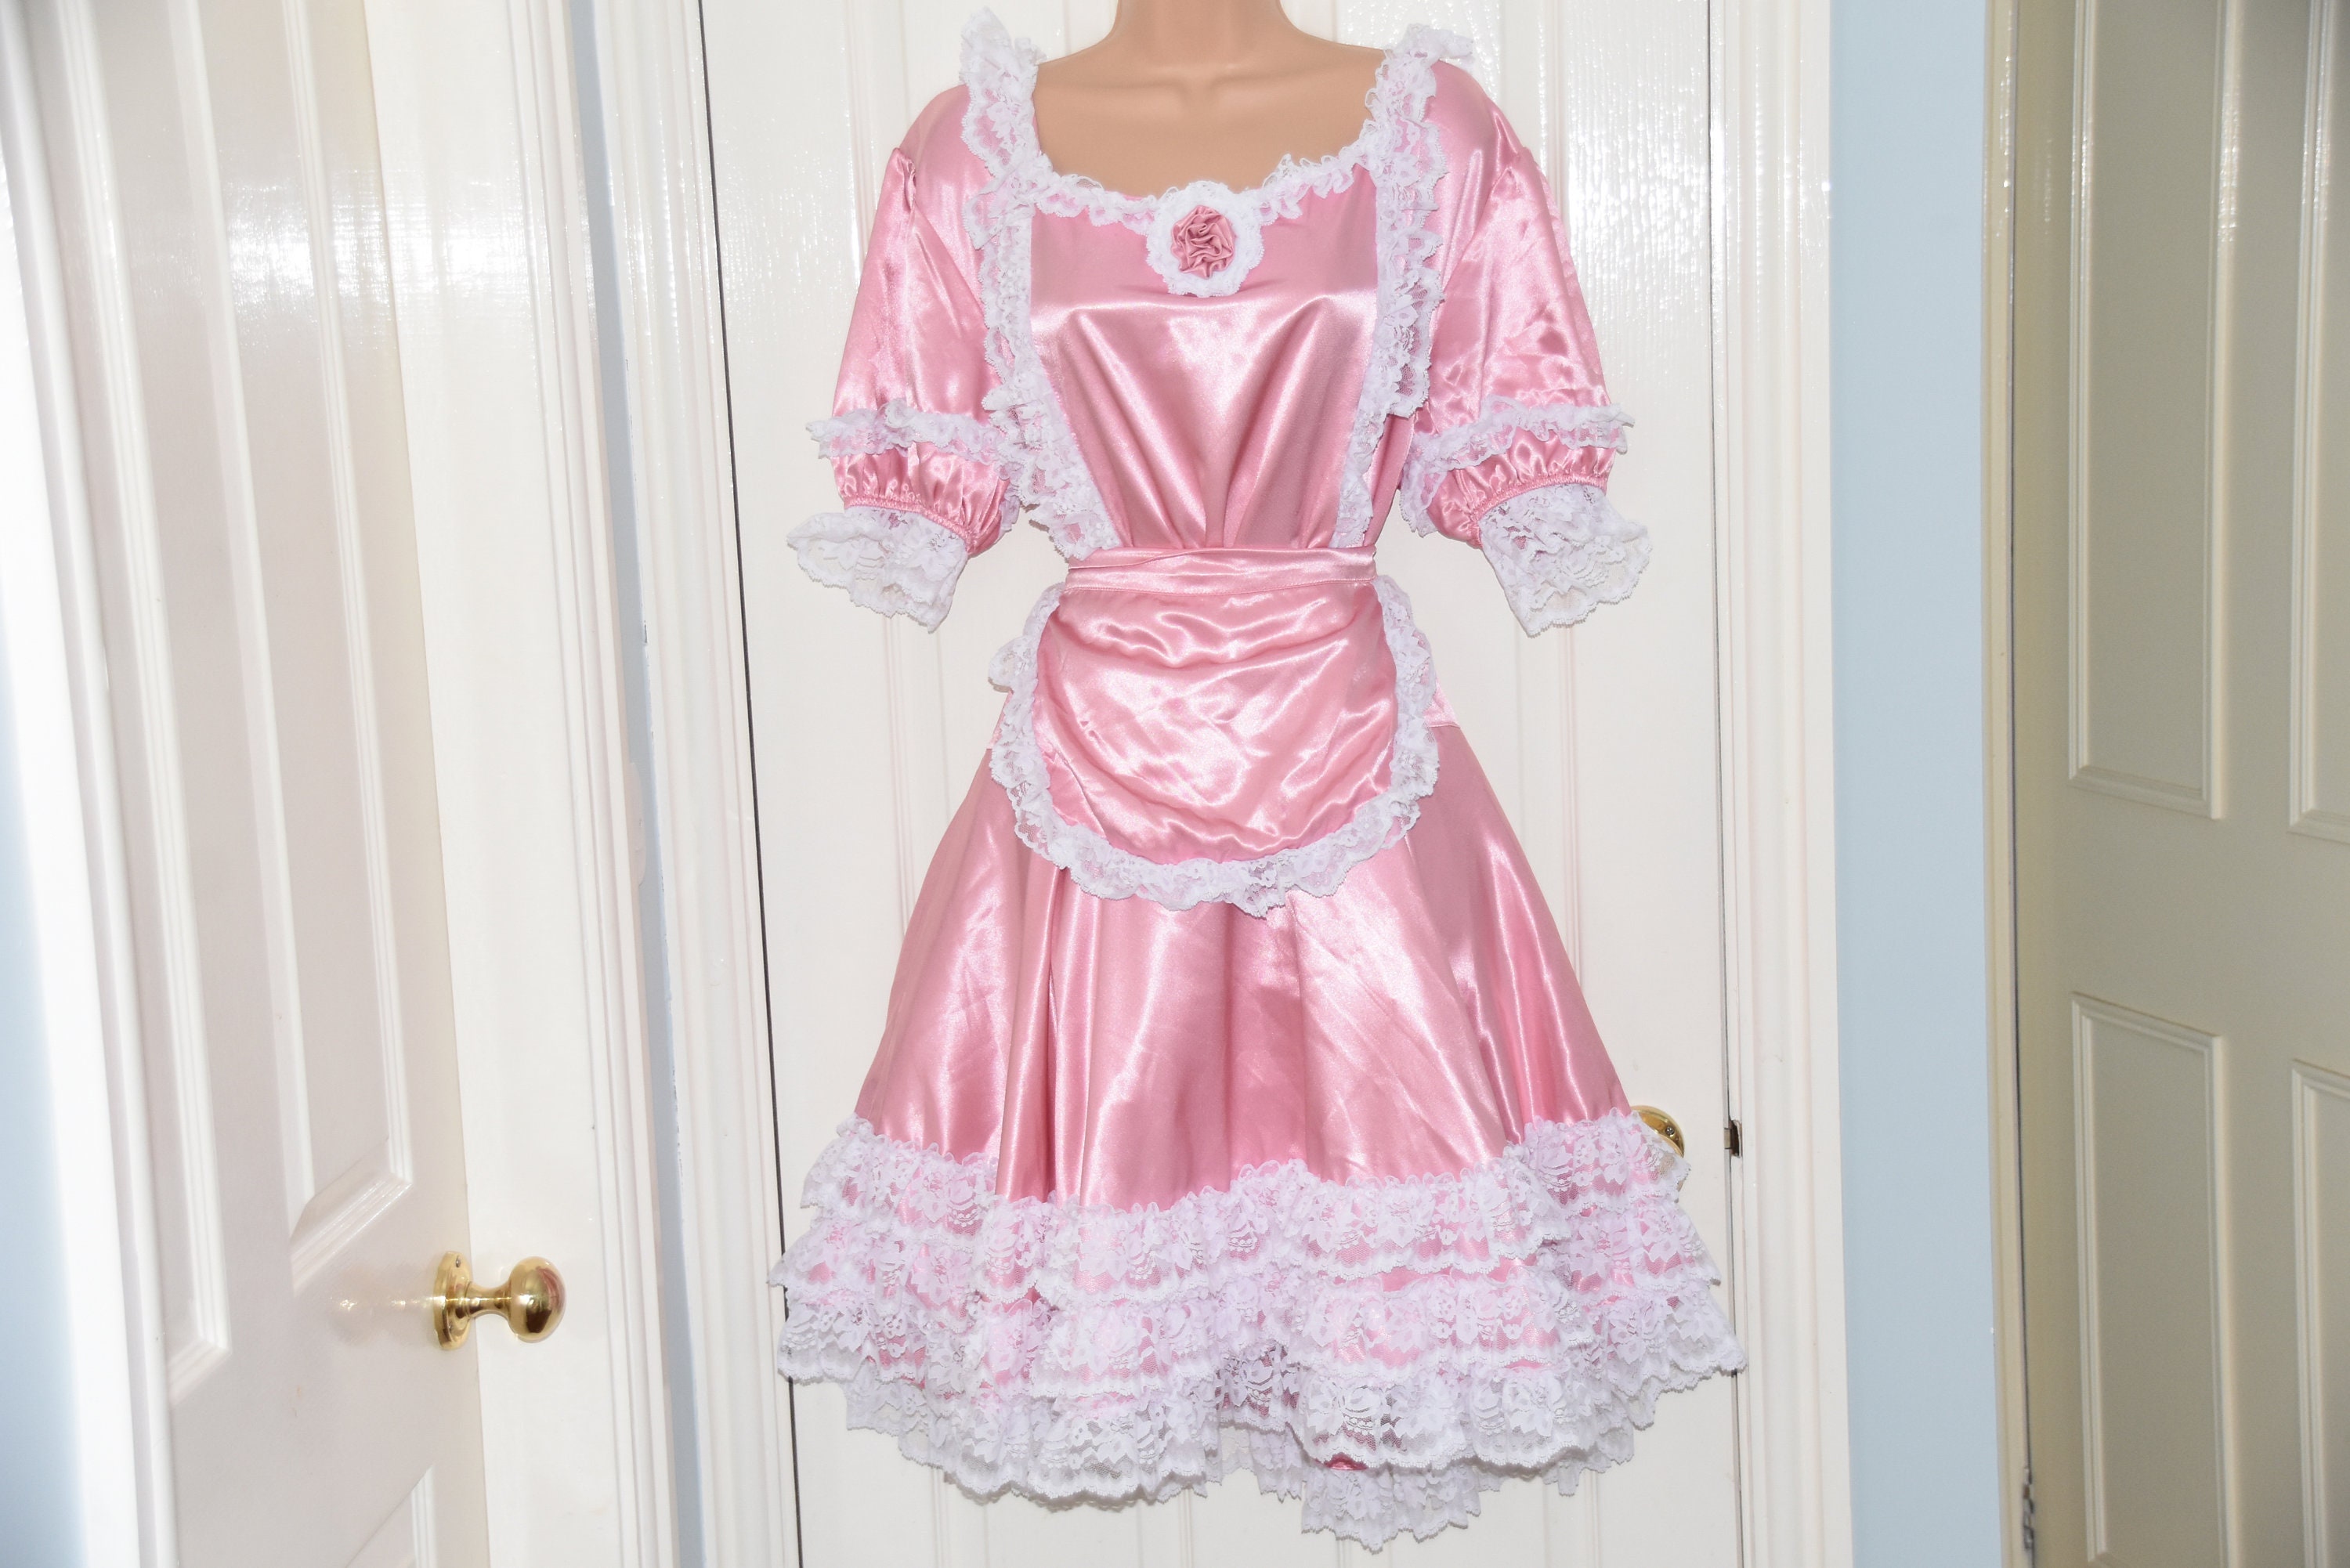 Sissy Maid Silky Satin Dress Petticoat and Pinny Larger Size